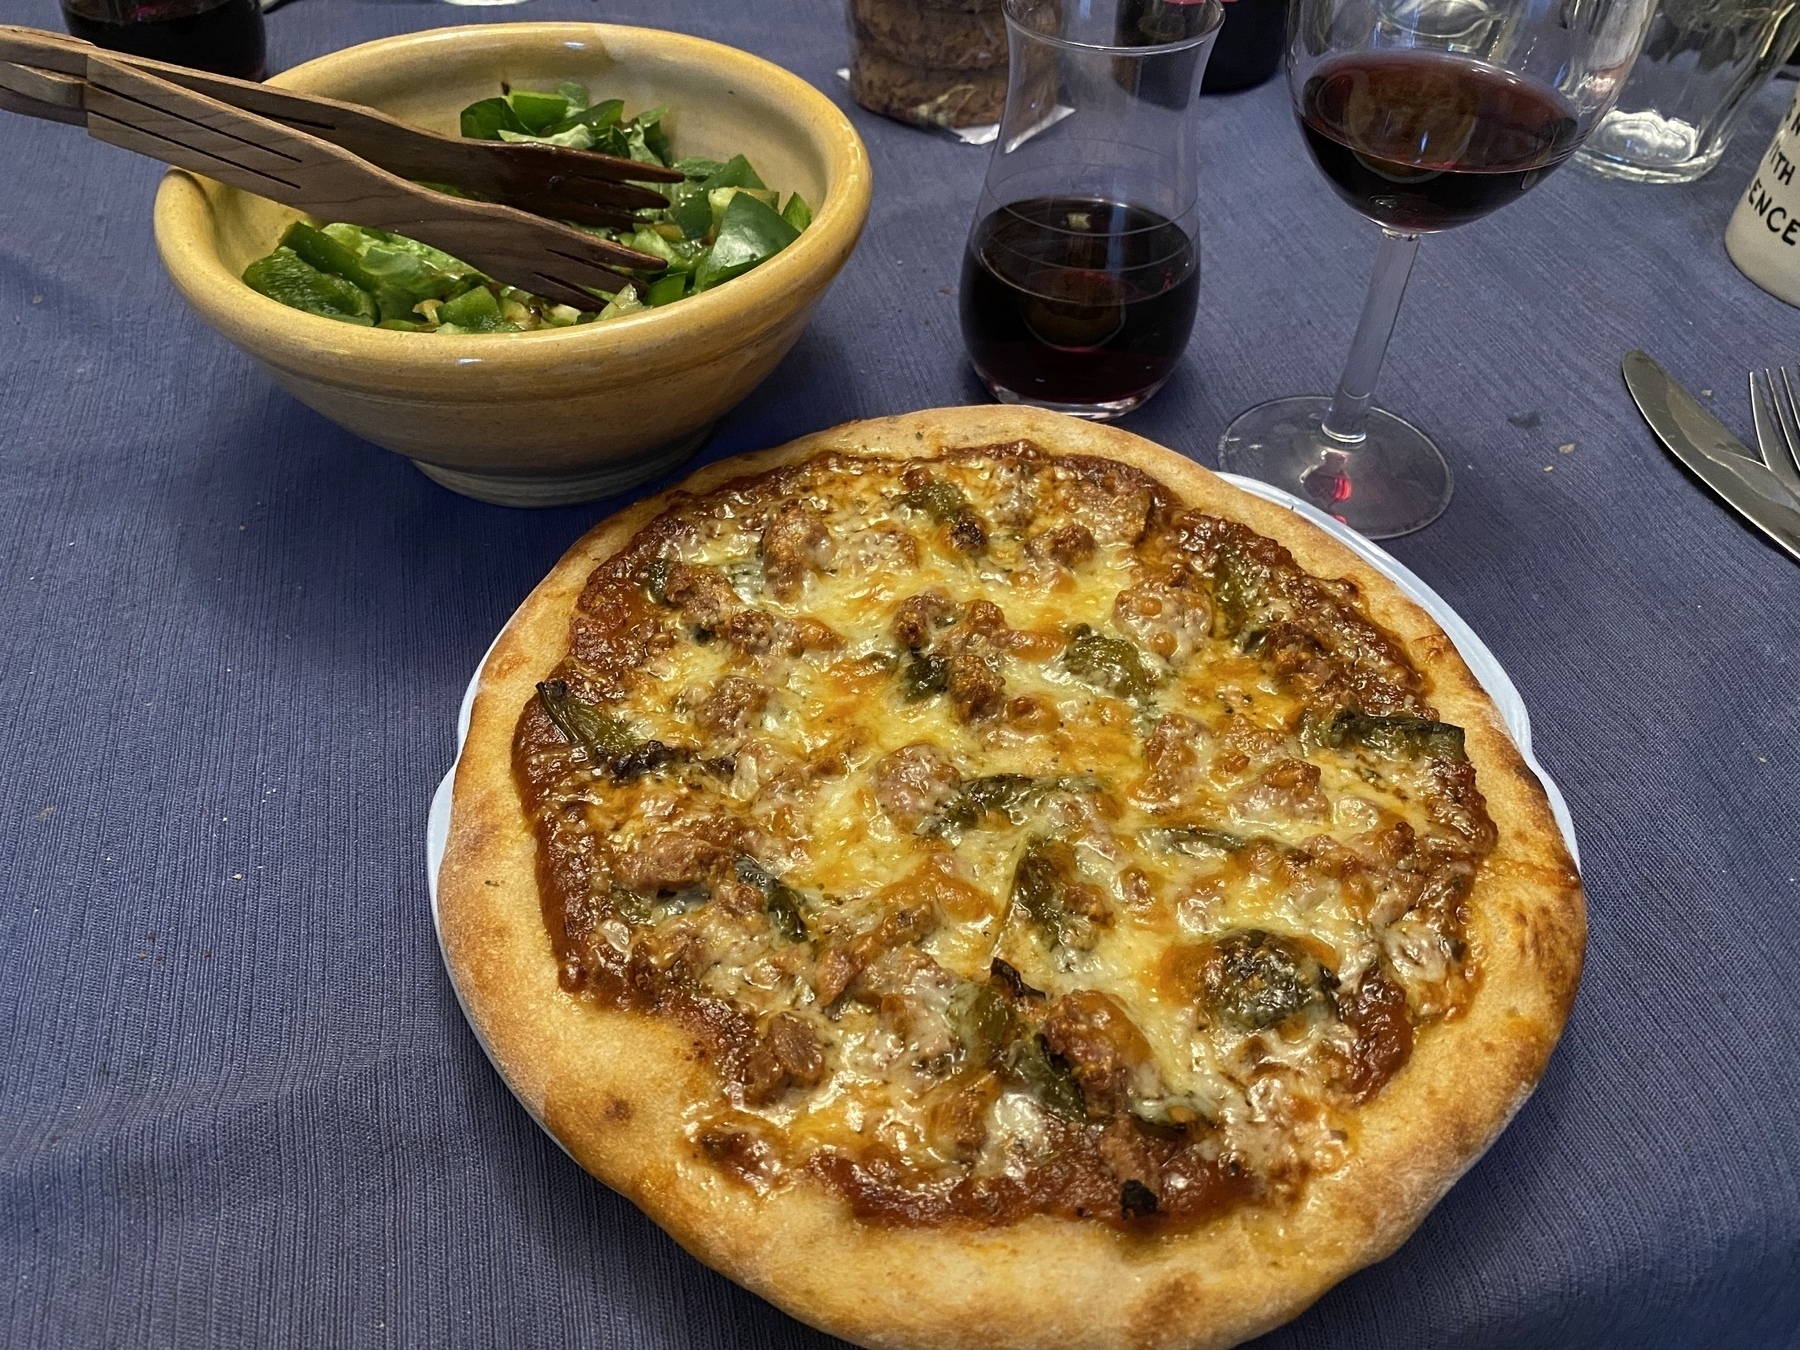 Small pizza on a plate, next to a small bowl of salad and a glass of wine.